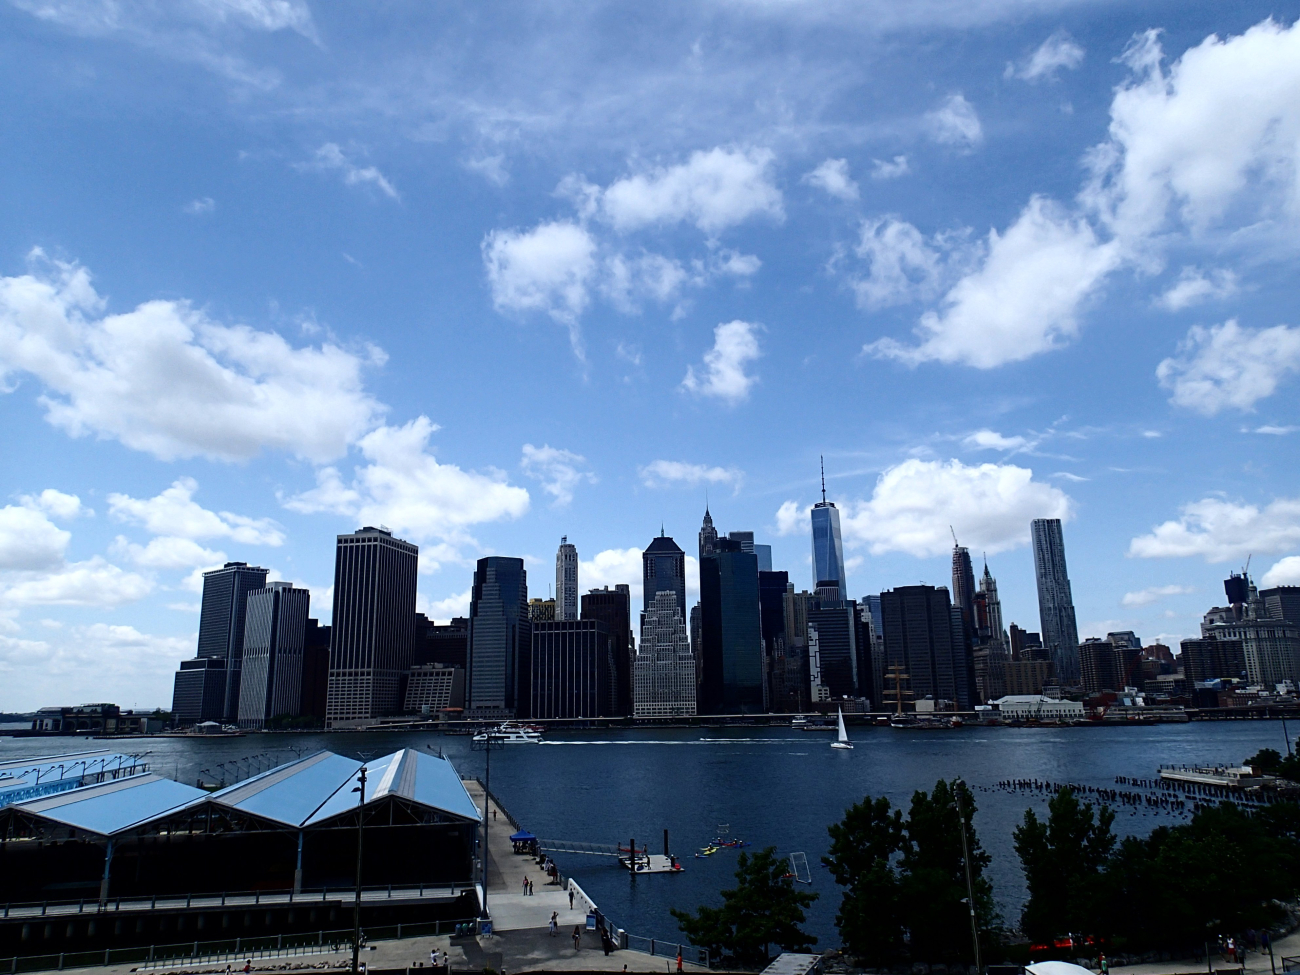 A spectacular view of the south tip of Manhattan Island from Brooklyn BridgePark